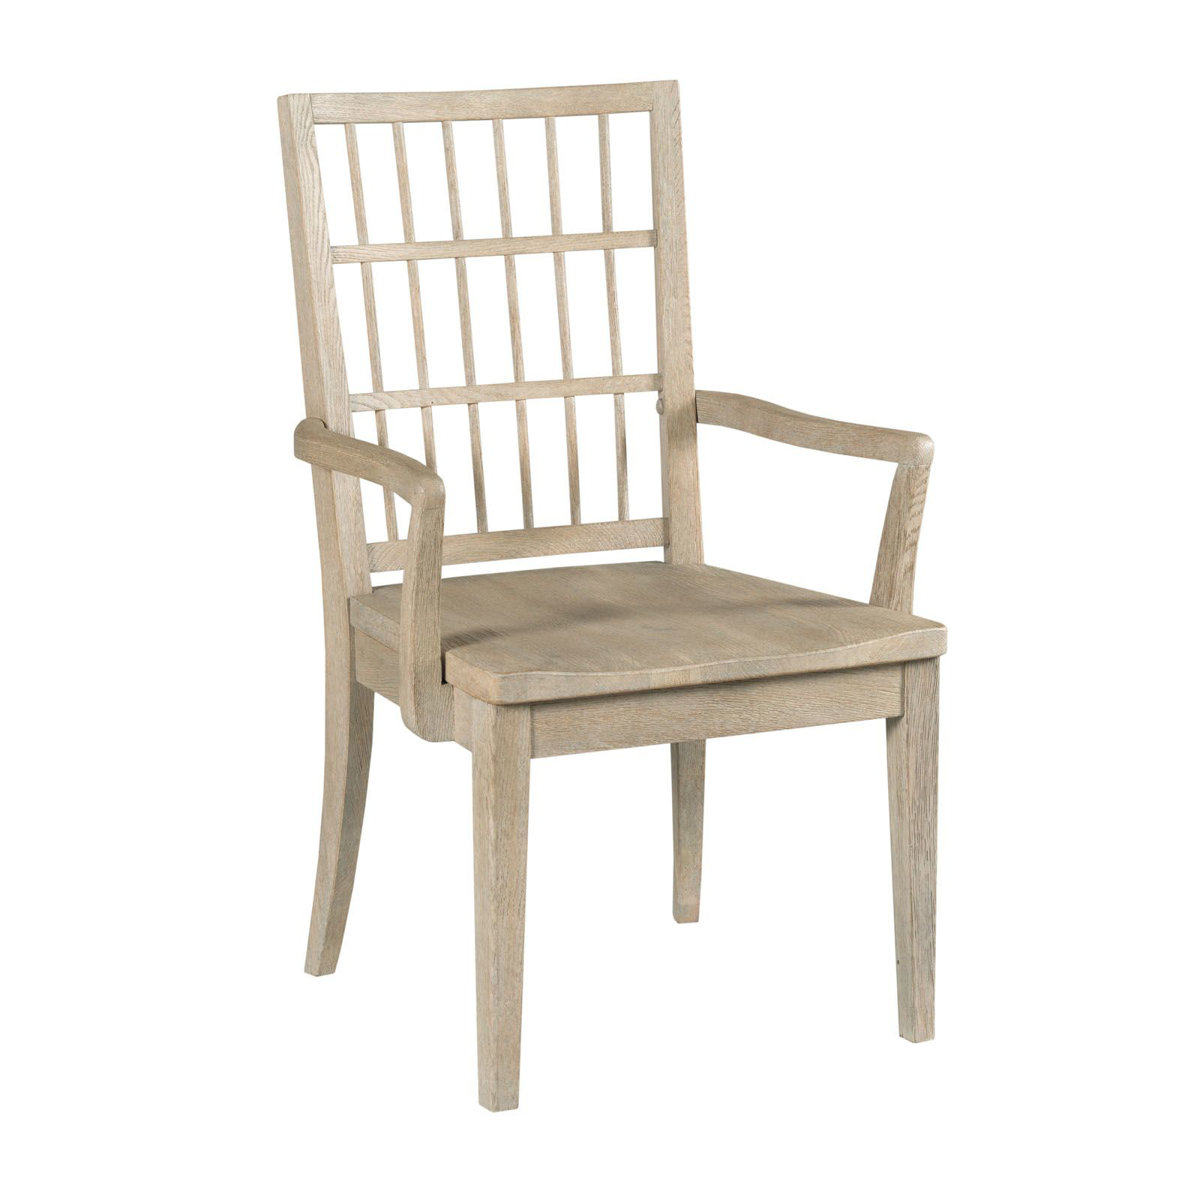 Picture of Symmetry Wood Arm Chair